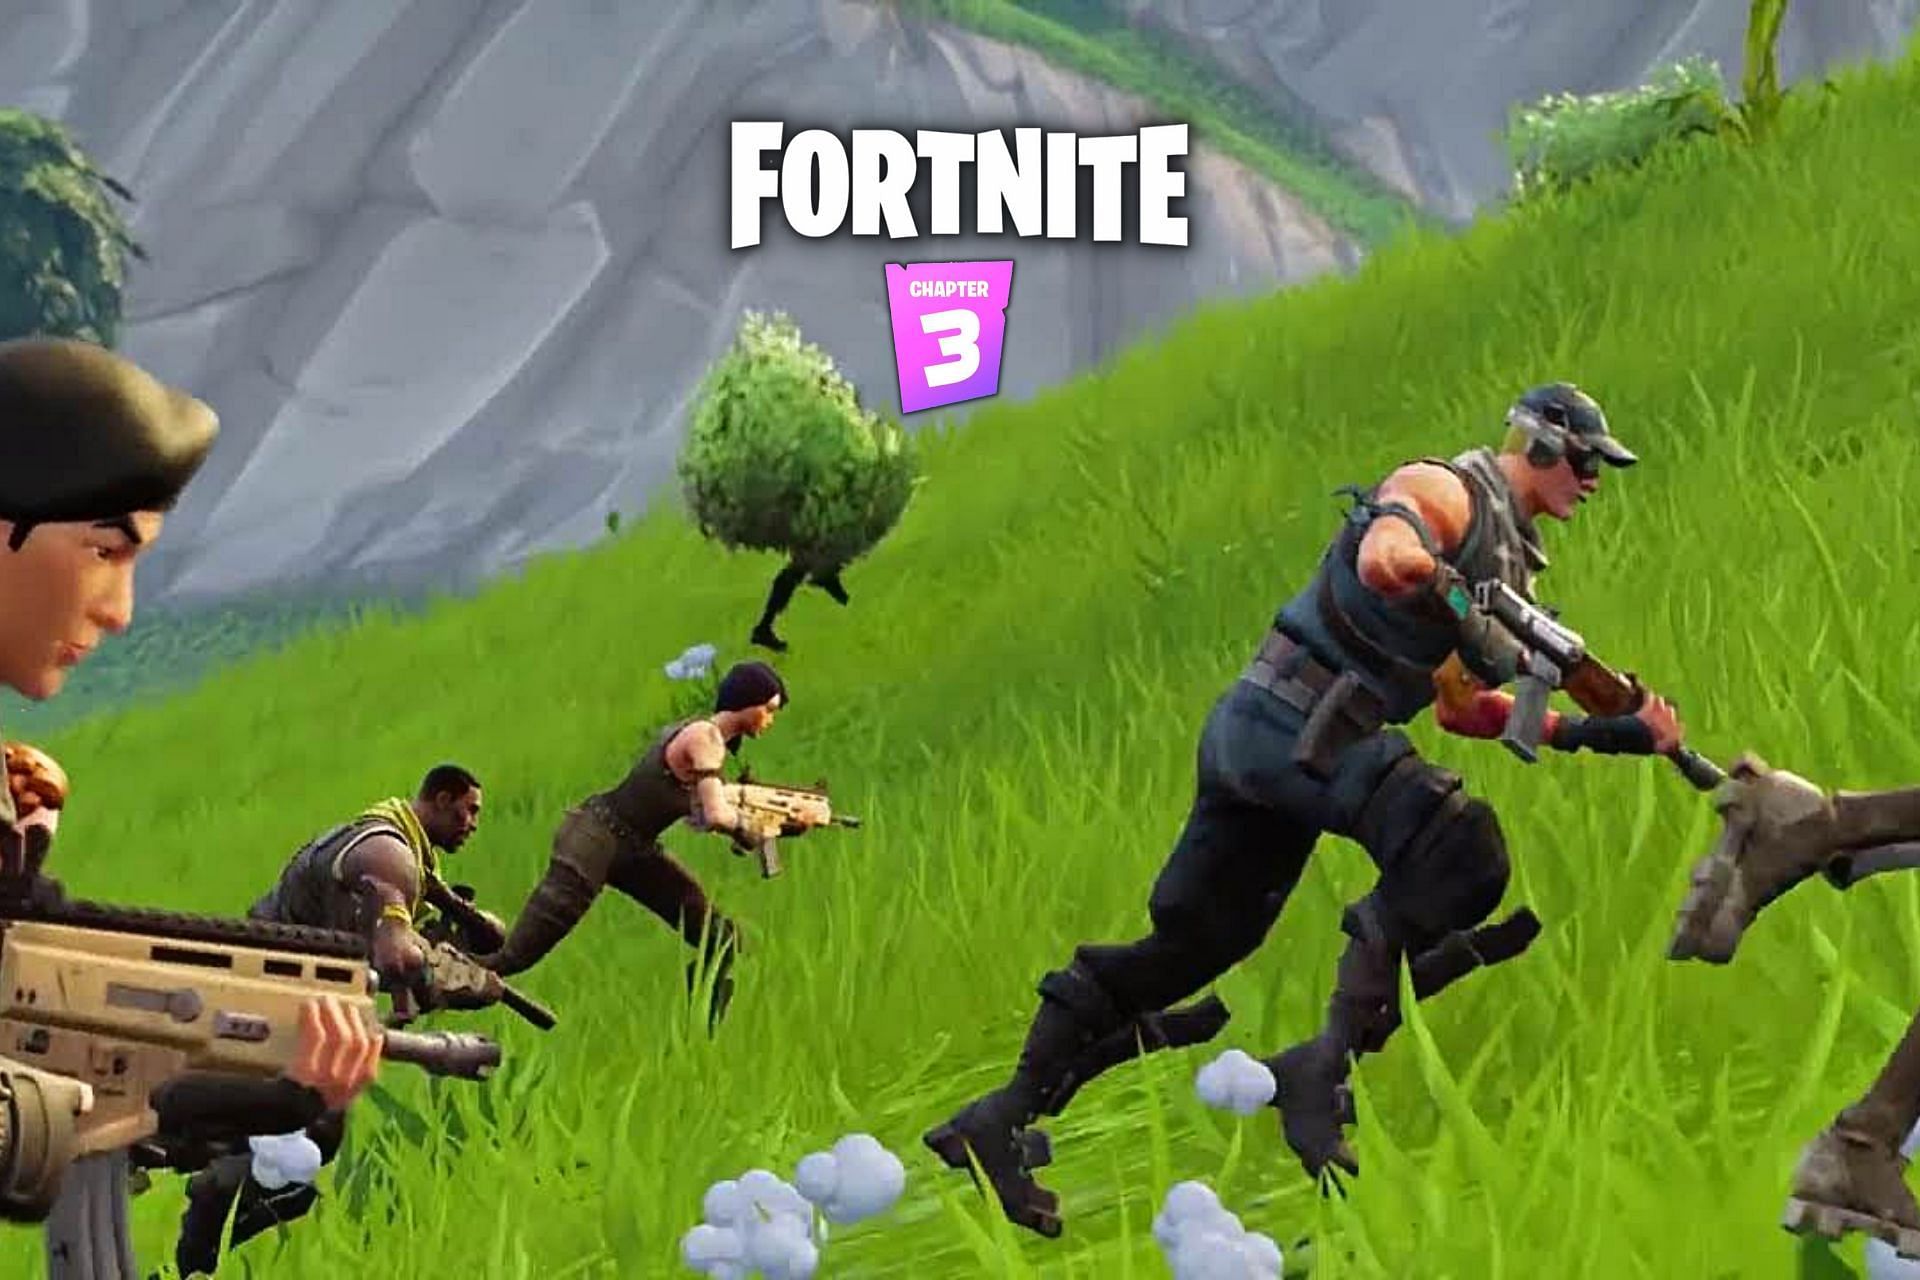 Tactical Sprint in Fortnite (Image via Twitter/HYPEX)